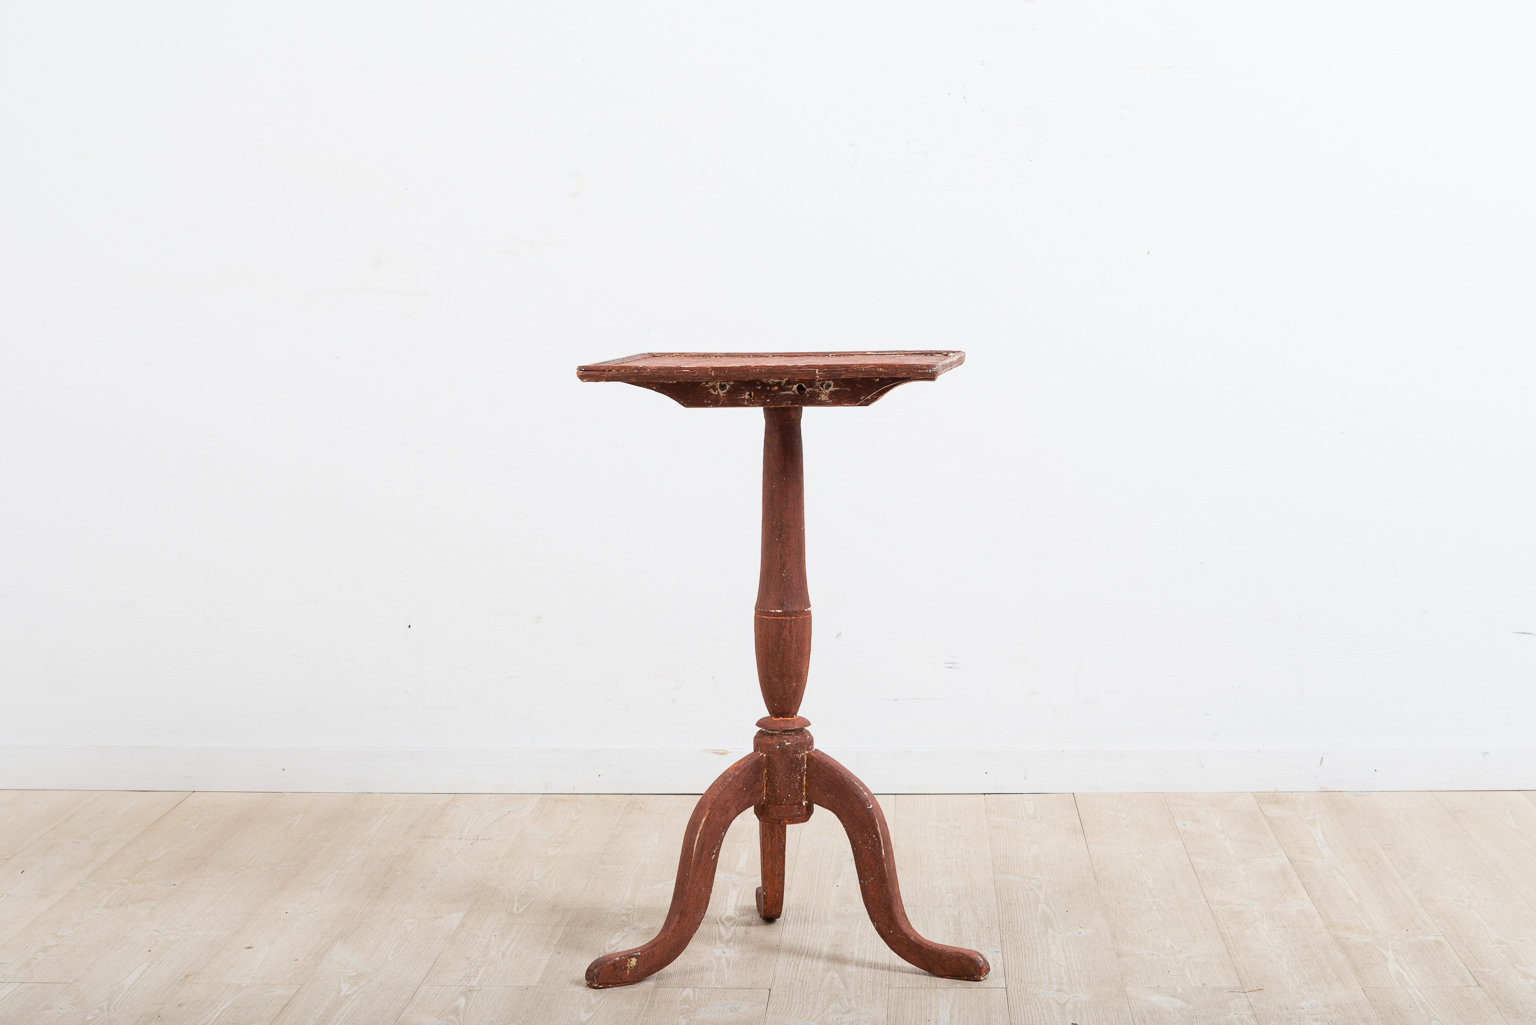 Gustavian pedestal table with a rectangular table top. The table top has a rim around the edges. Manufactured in Northern Sweden around 1780